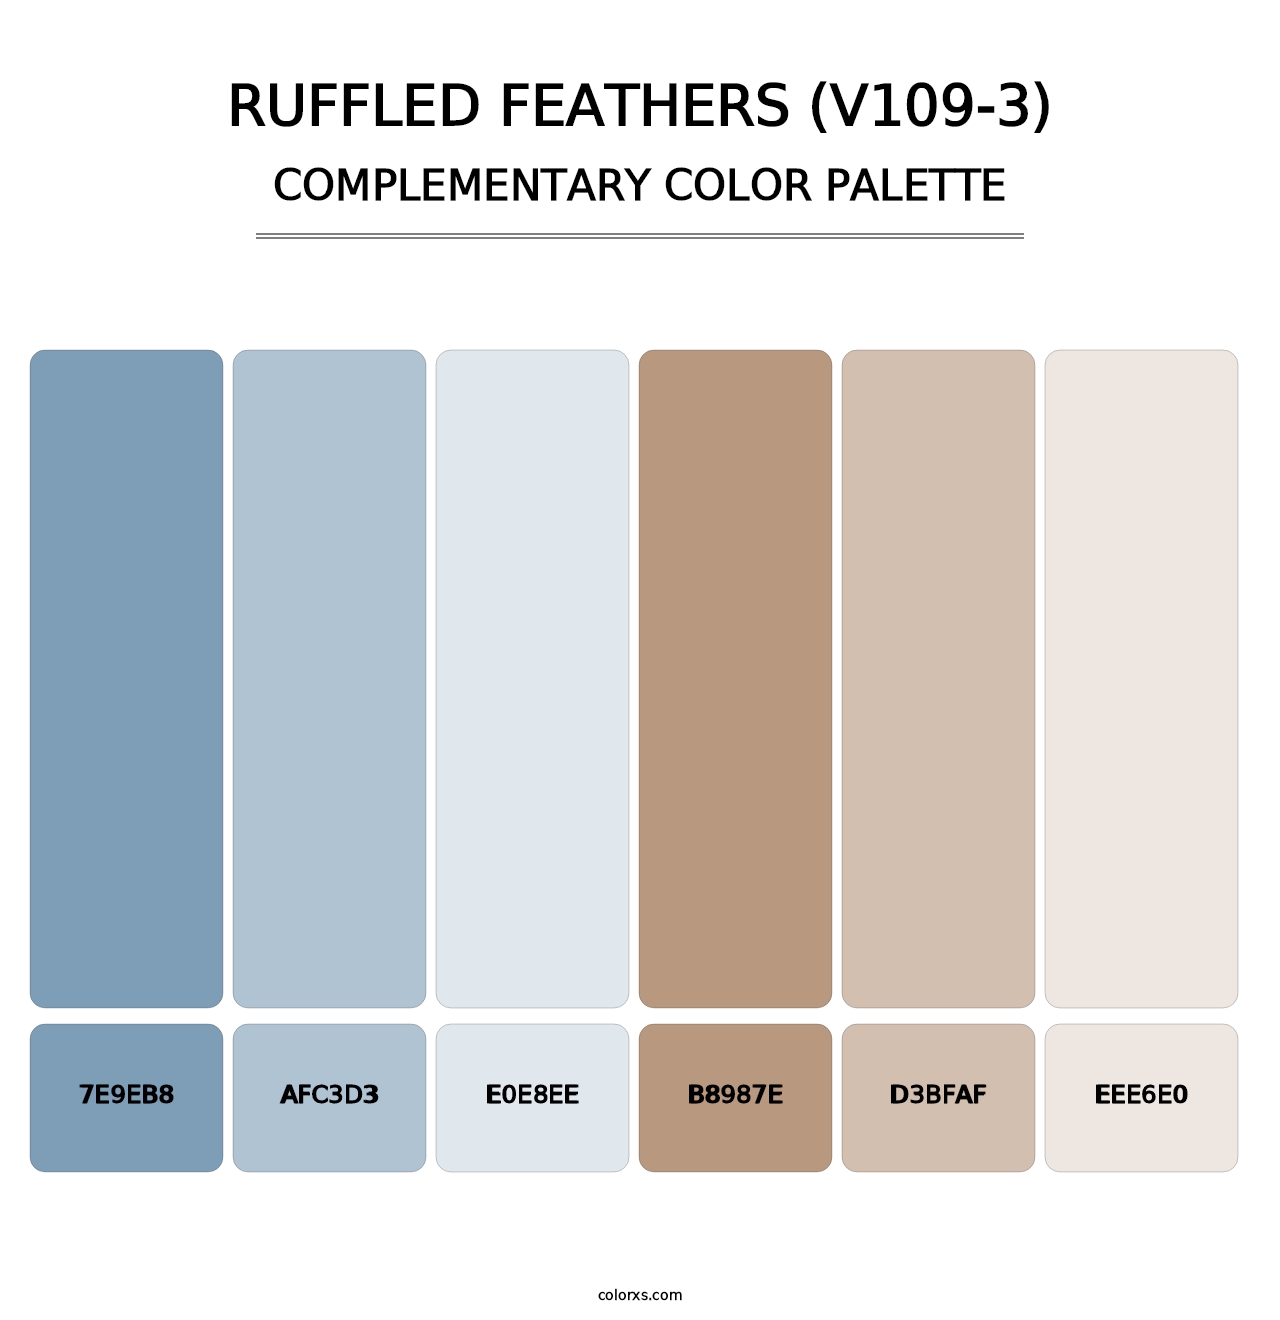 Ruffled Feathers (V109-3) - Complementary Color Palette